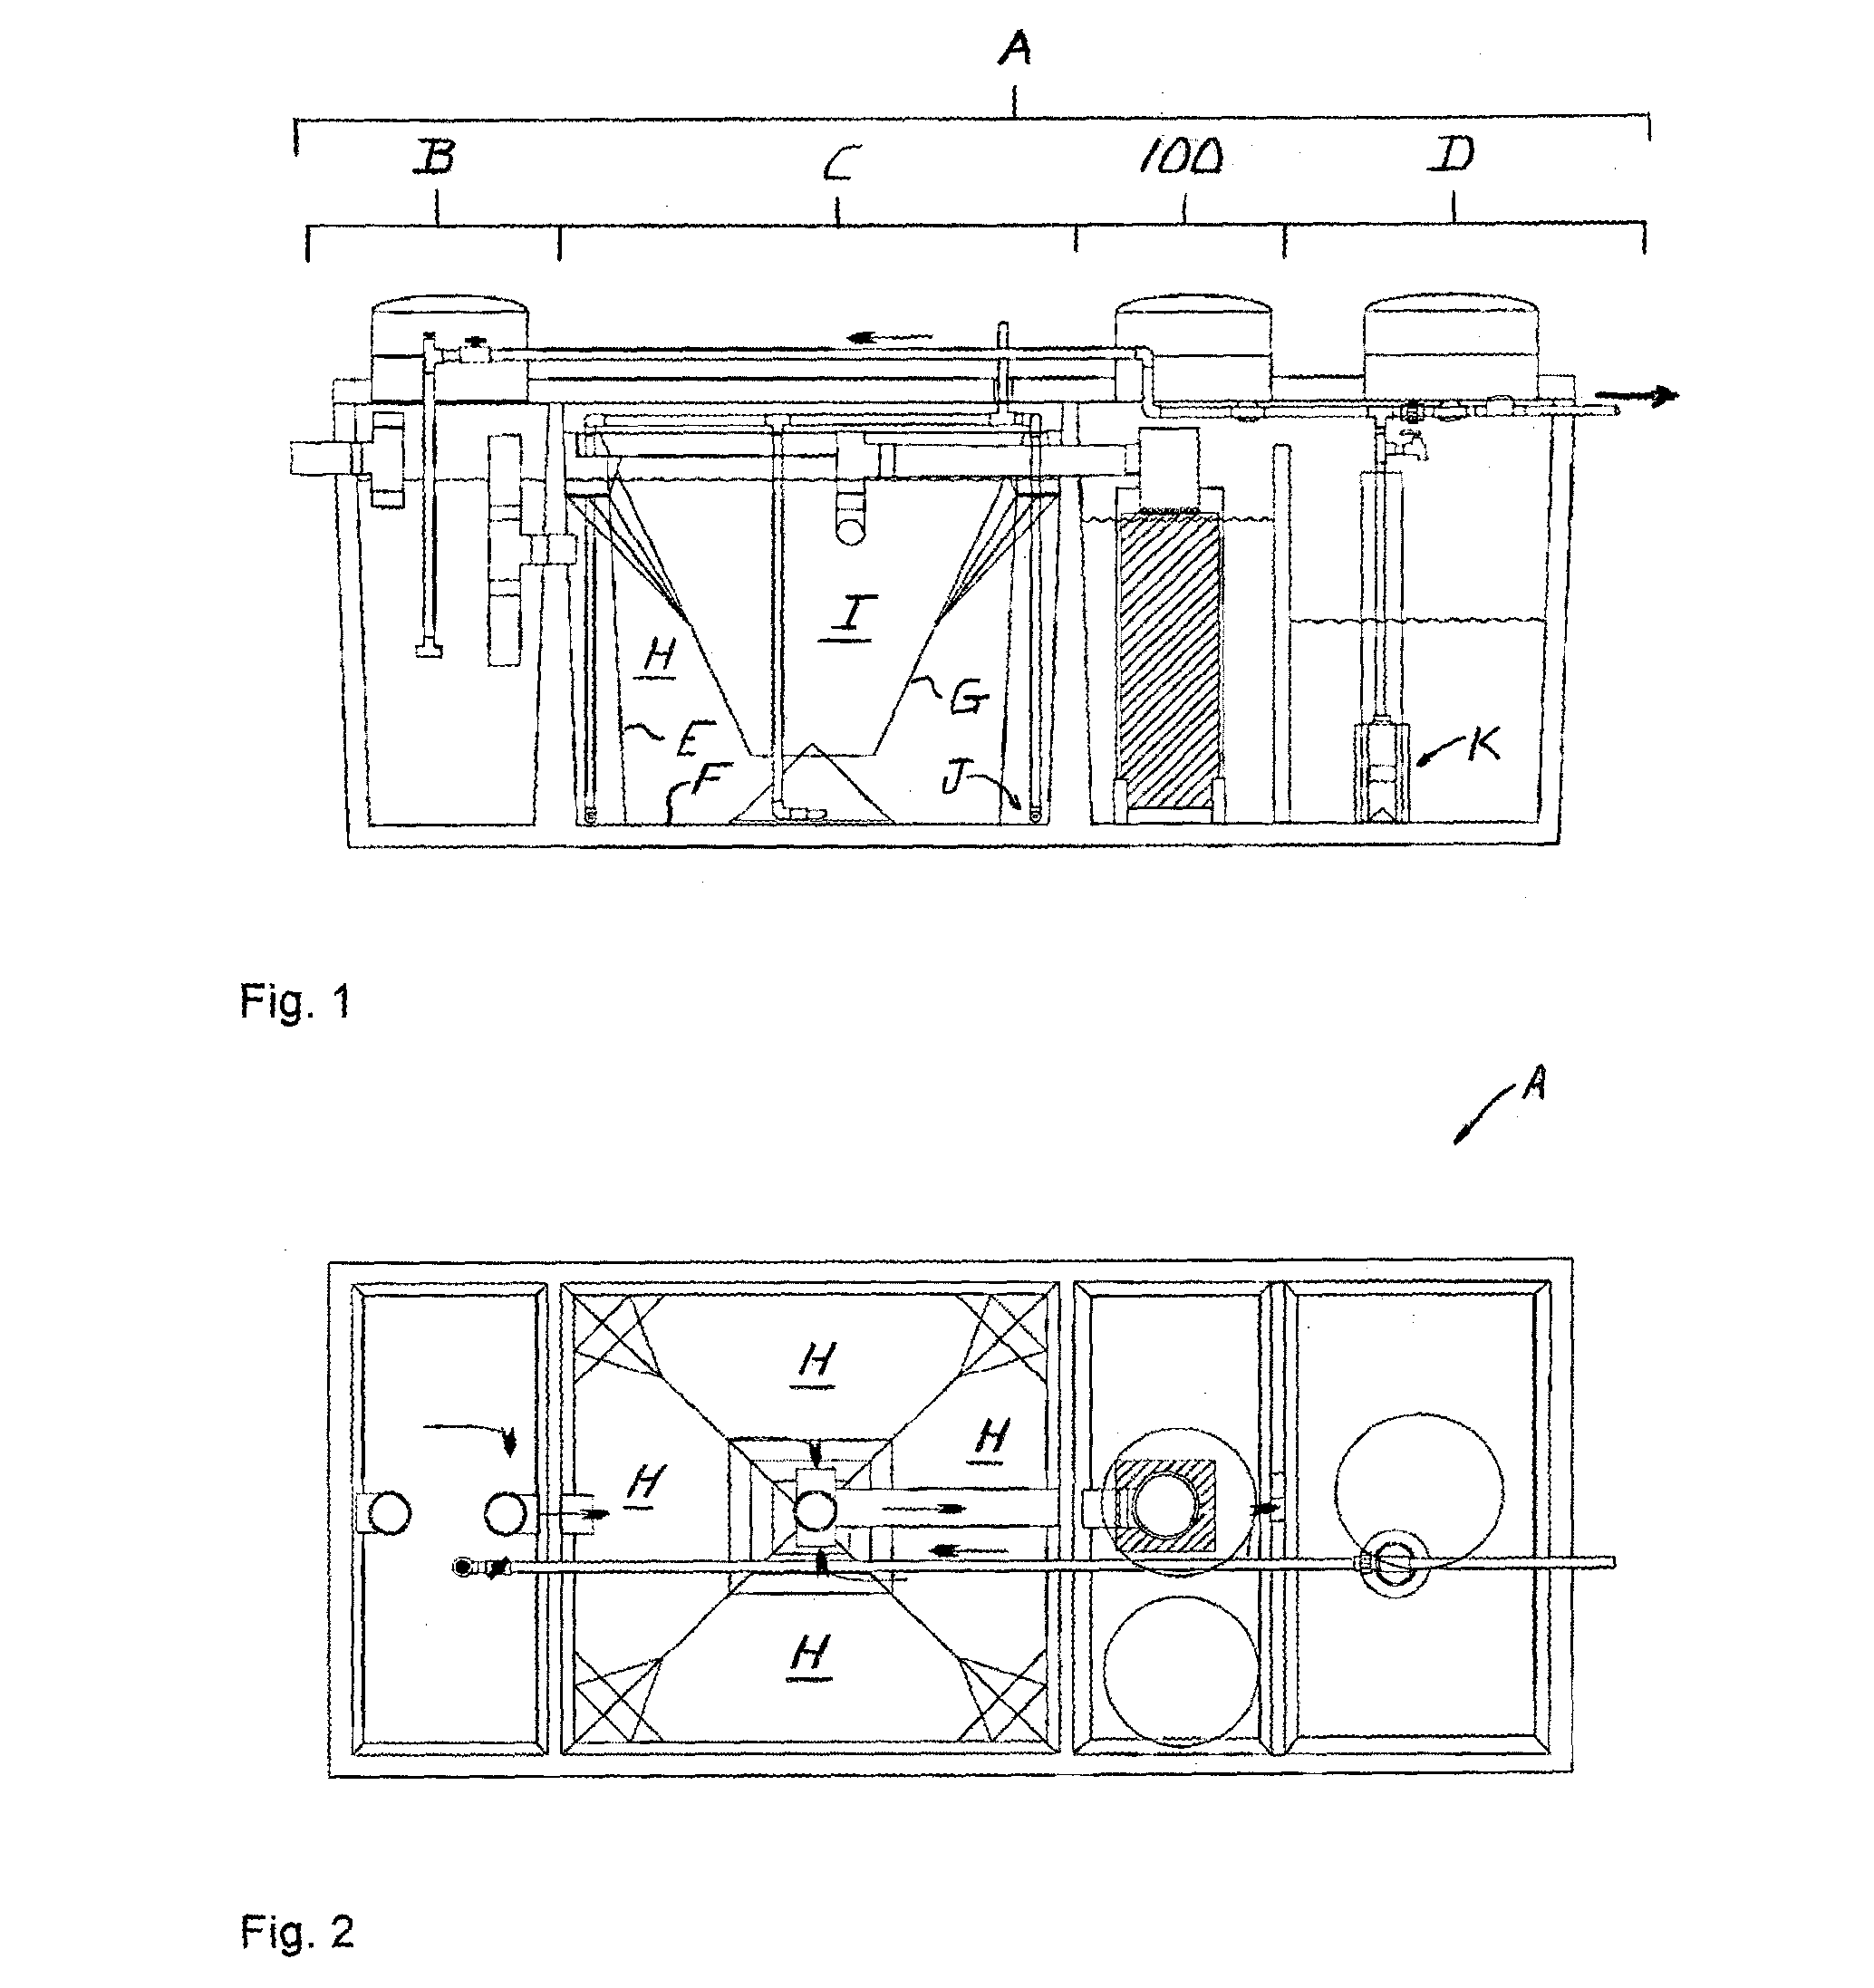 Apparatus for denitrifying wastewater